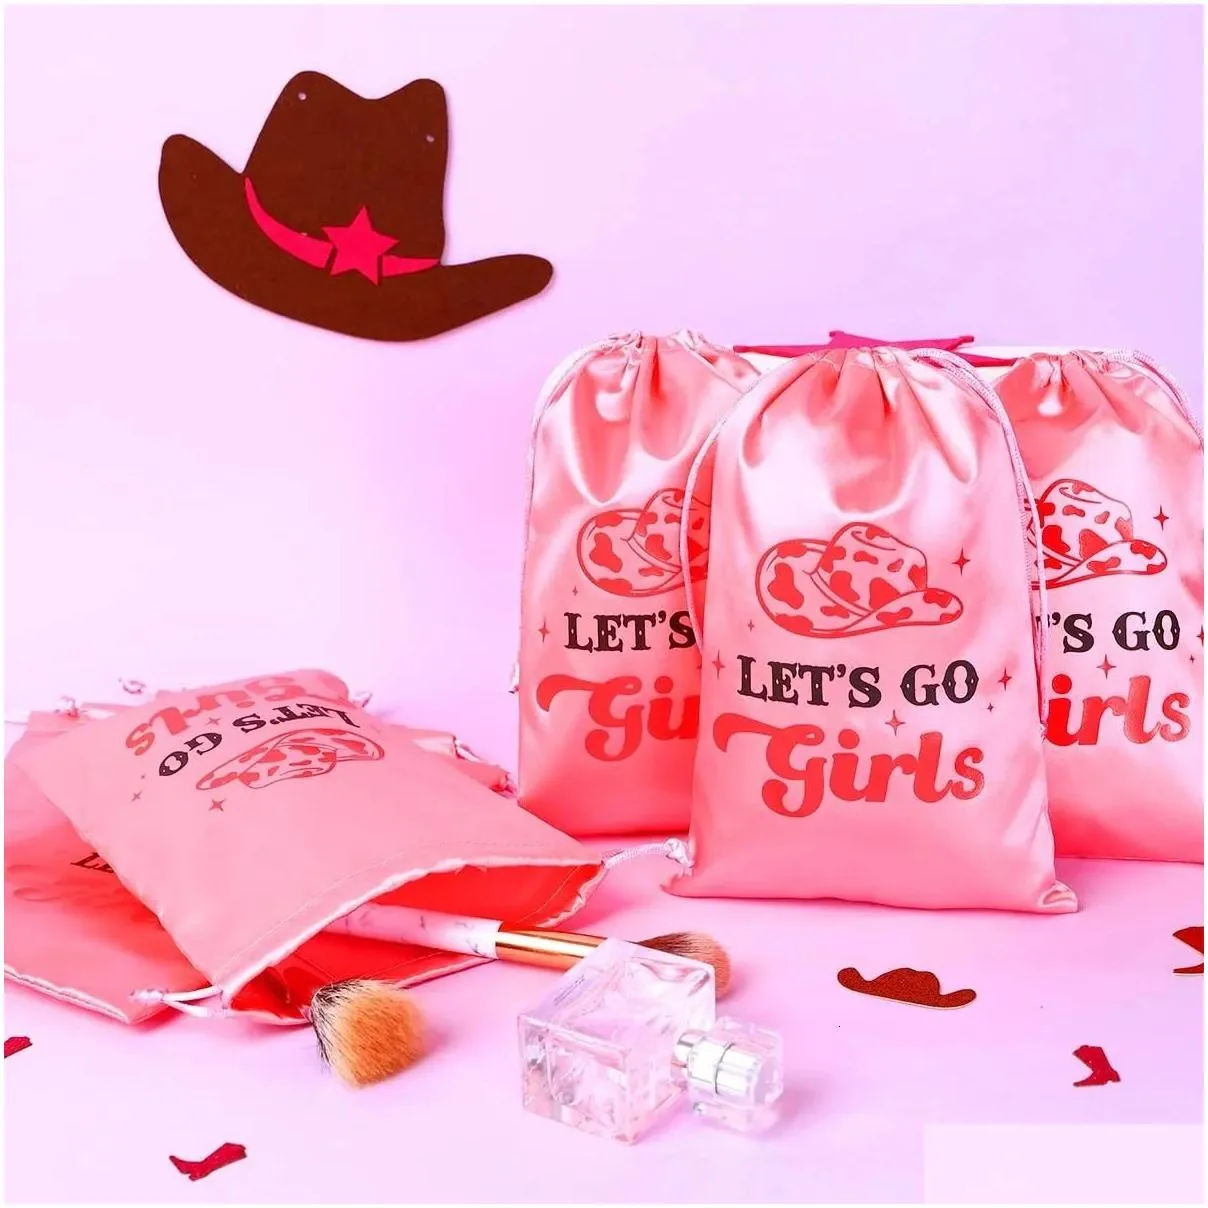 Other Event & Party Supplies 12 Pack Lets Go Girls Hangover Kit Party Favor Gift Bags Pink Cowgirl Decoration Bachelorette Bride Hen S Dhmgc